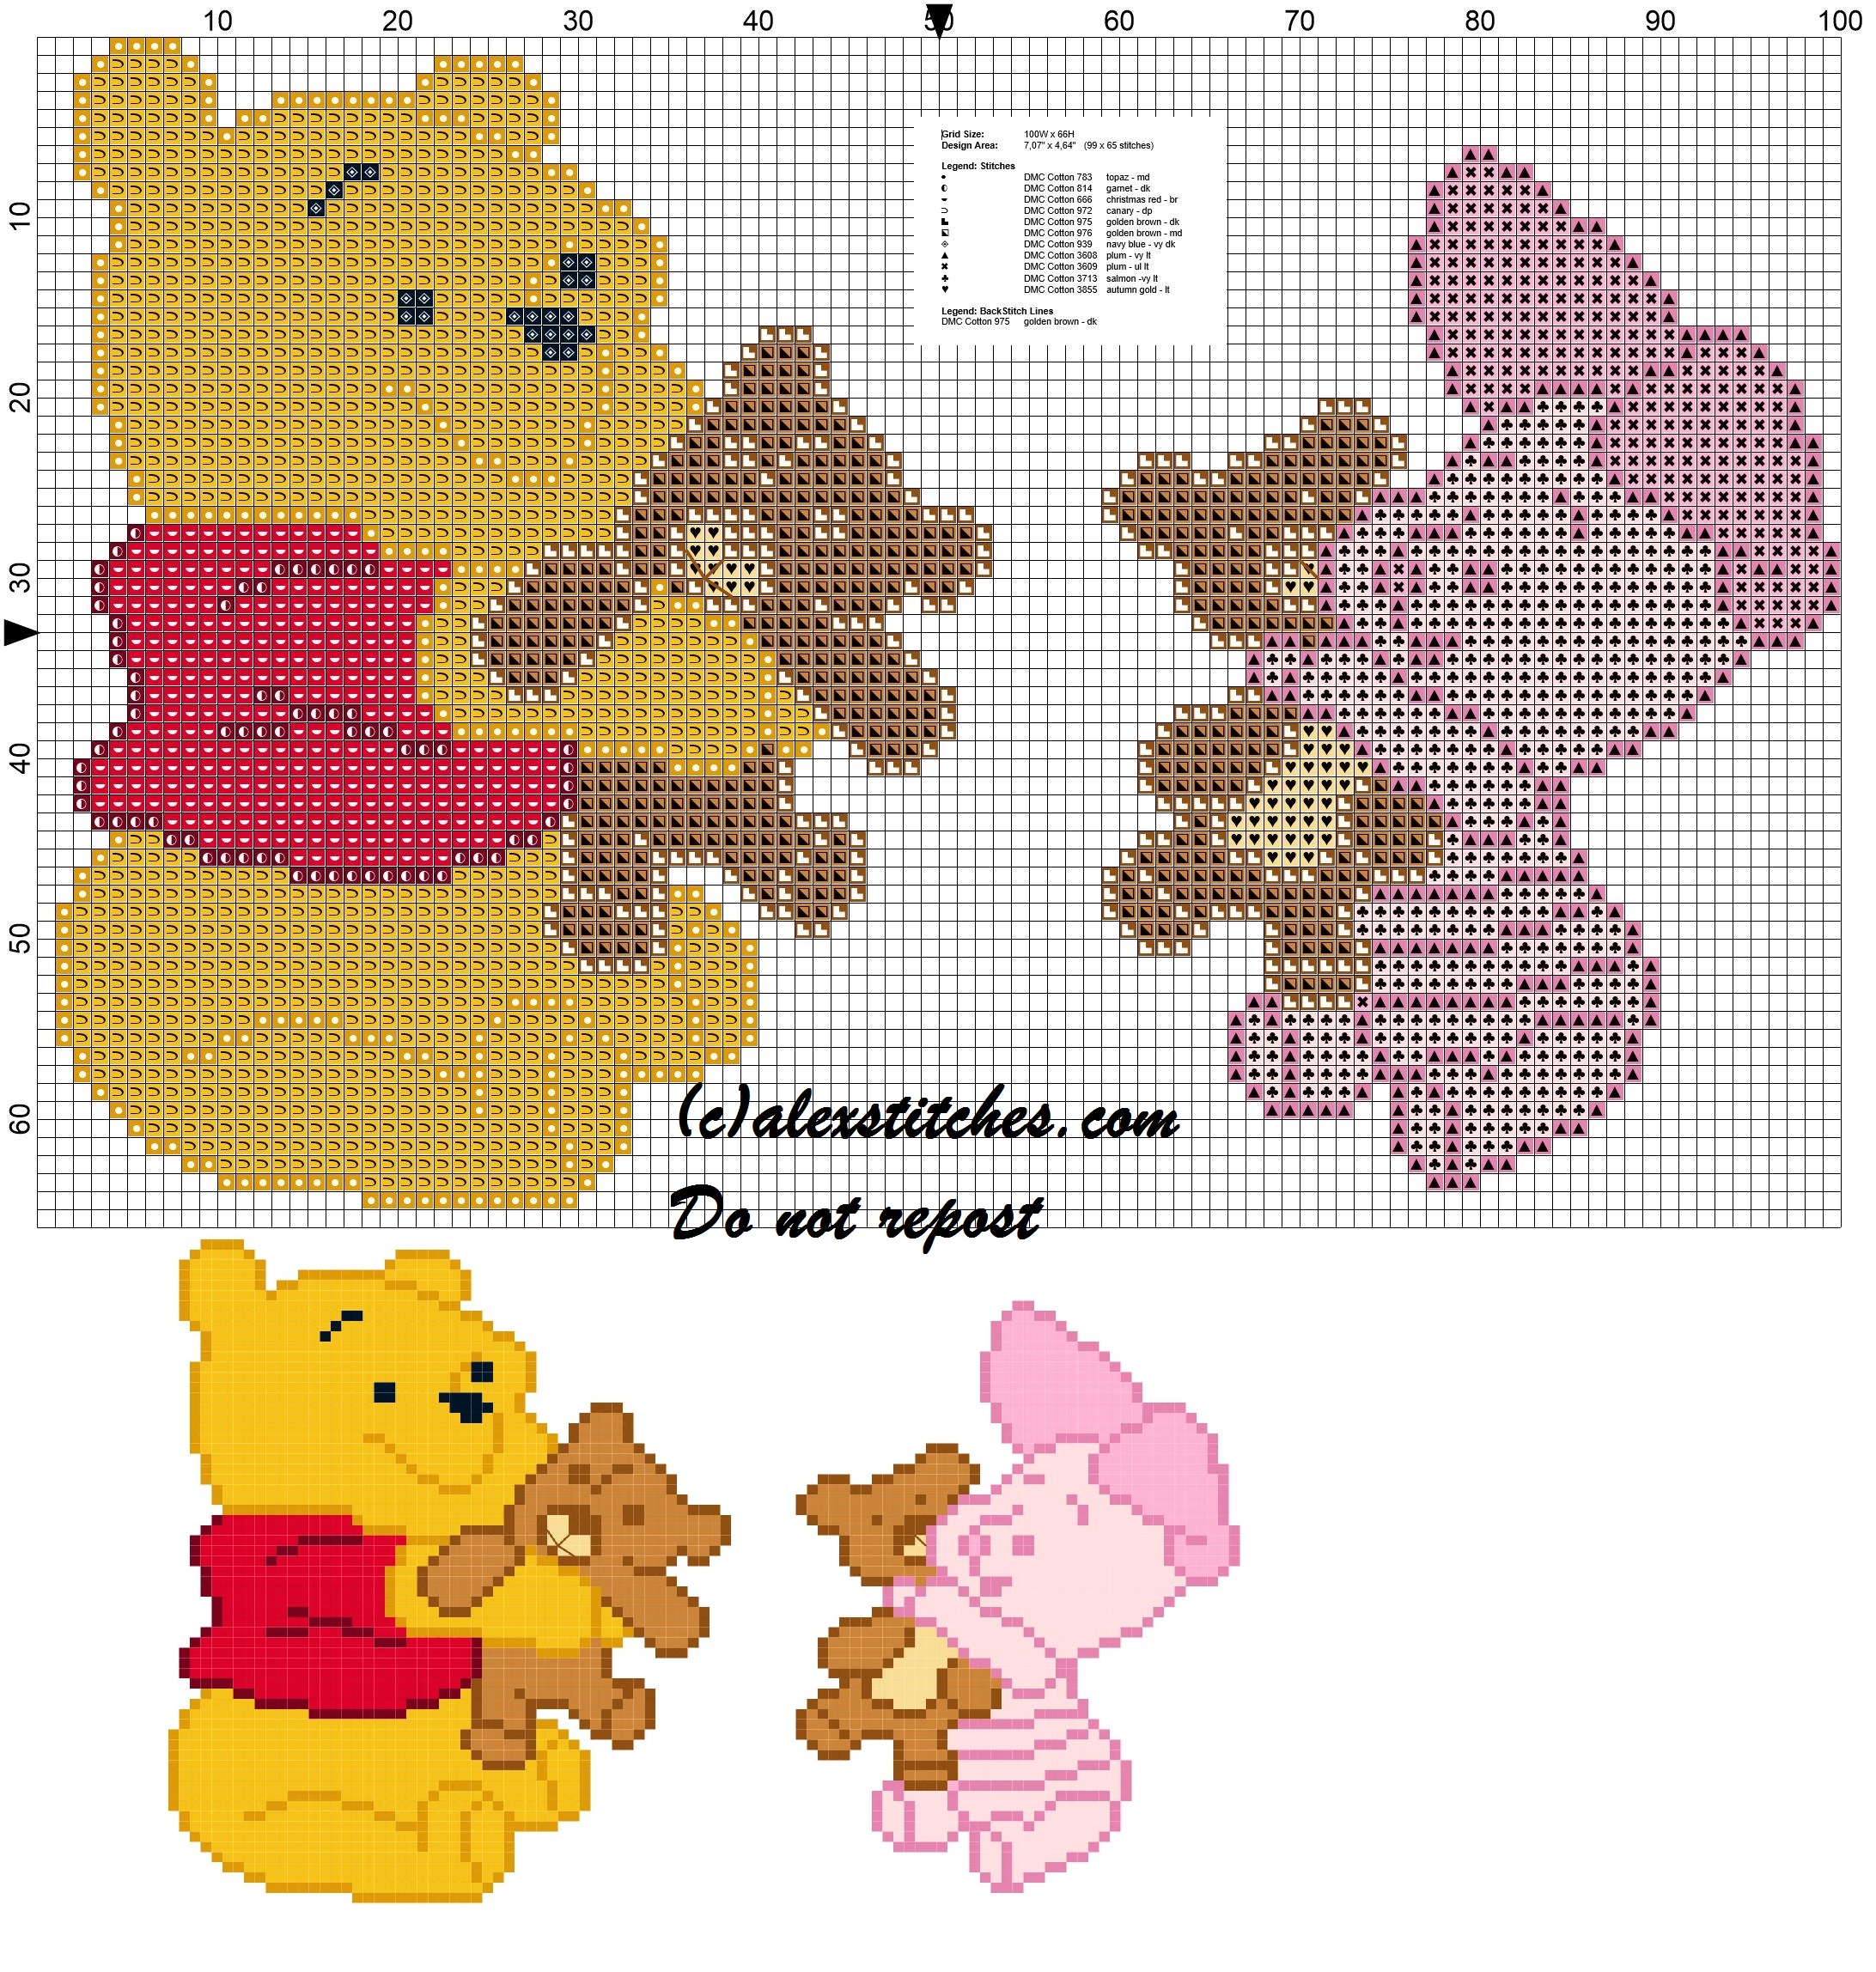 Winnie the Pooh and Piglet with teddy bear cross stitch patterns